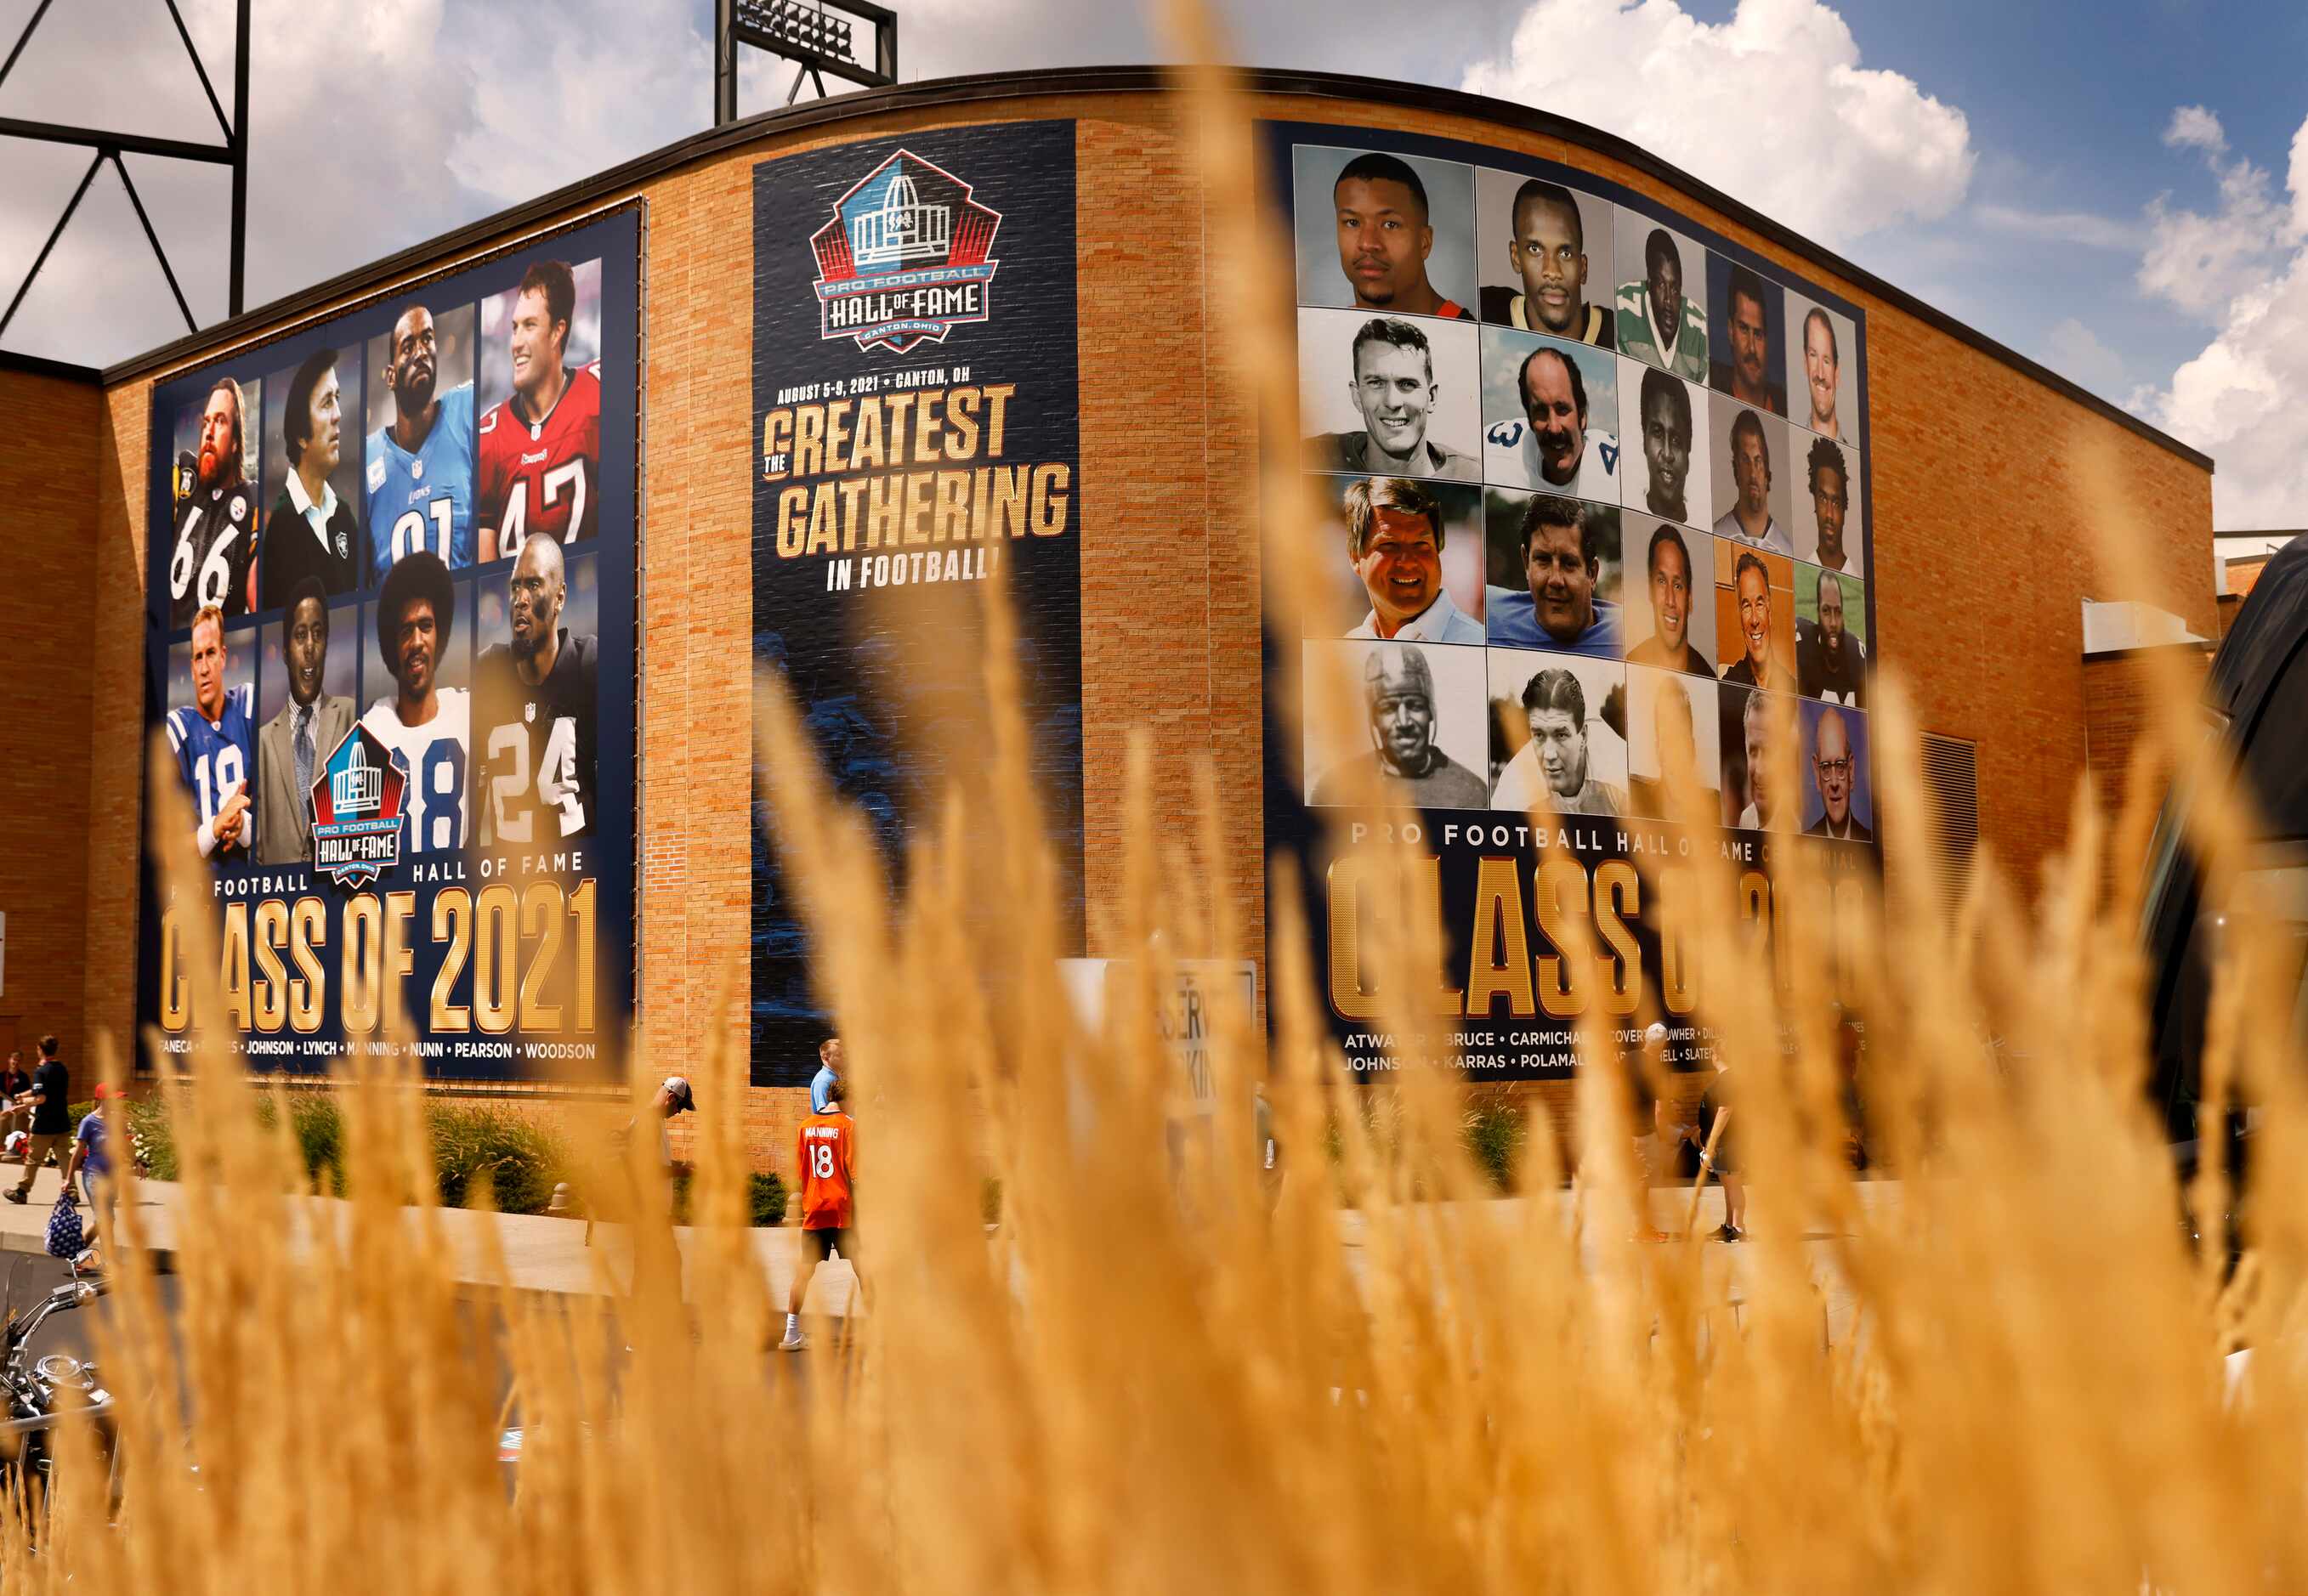 The Pro Football Hall of Fame Centennial Class of 2020 and Class of 2021 are pictured on the...